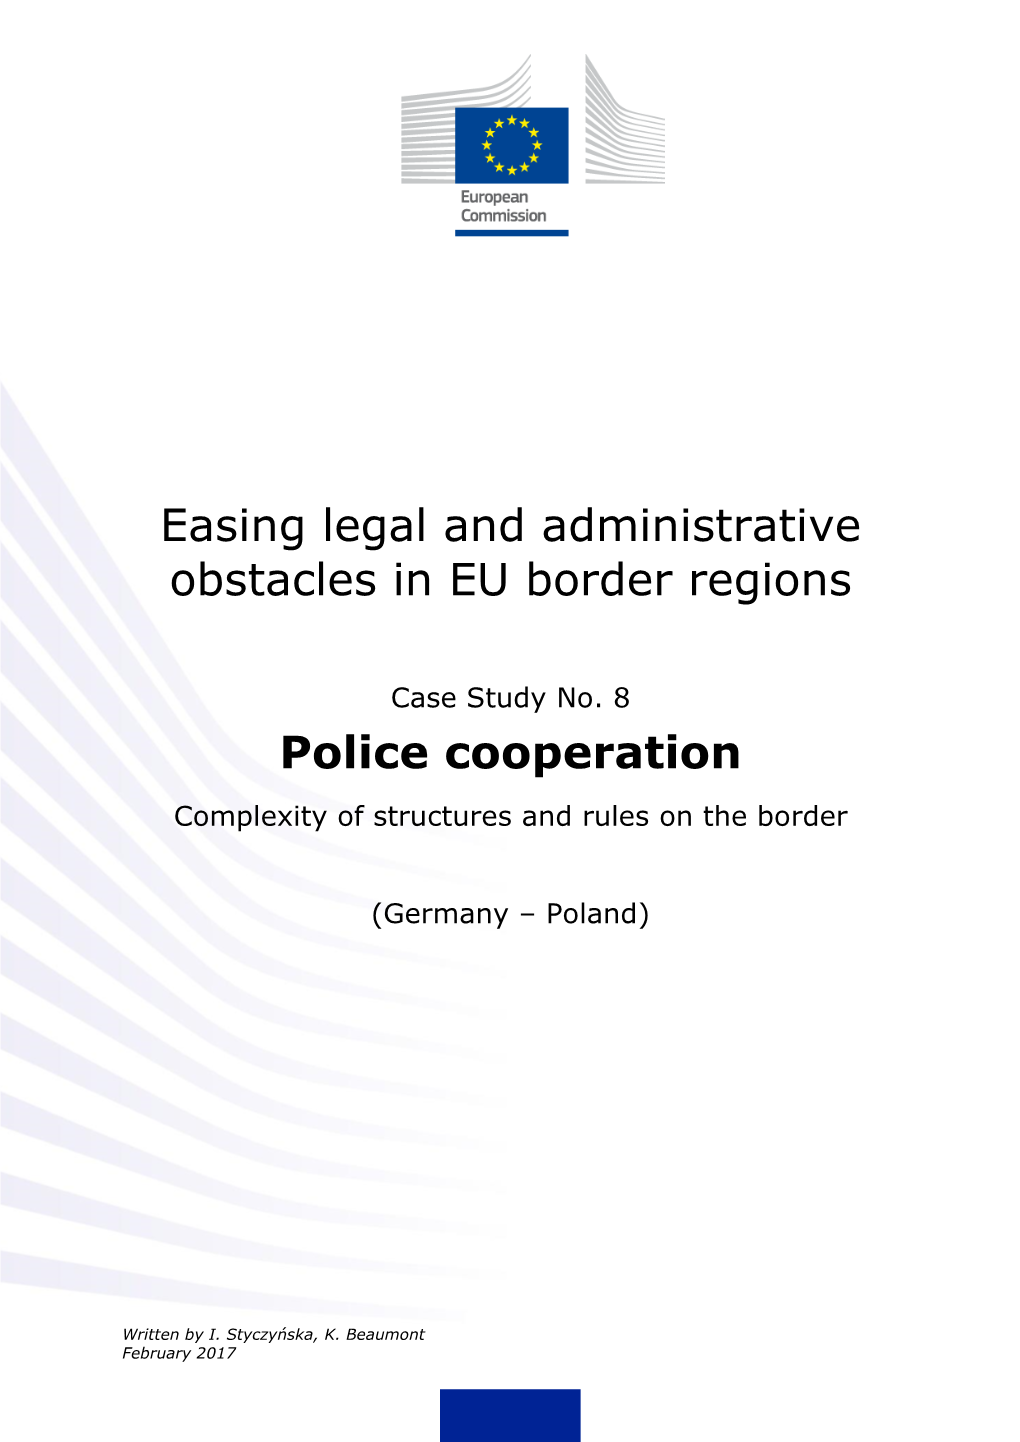 Police Cooperation Complexity of Structures and Rules on the Border